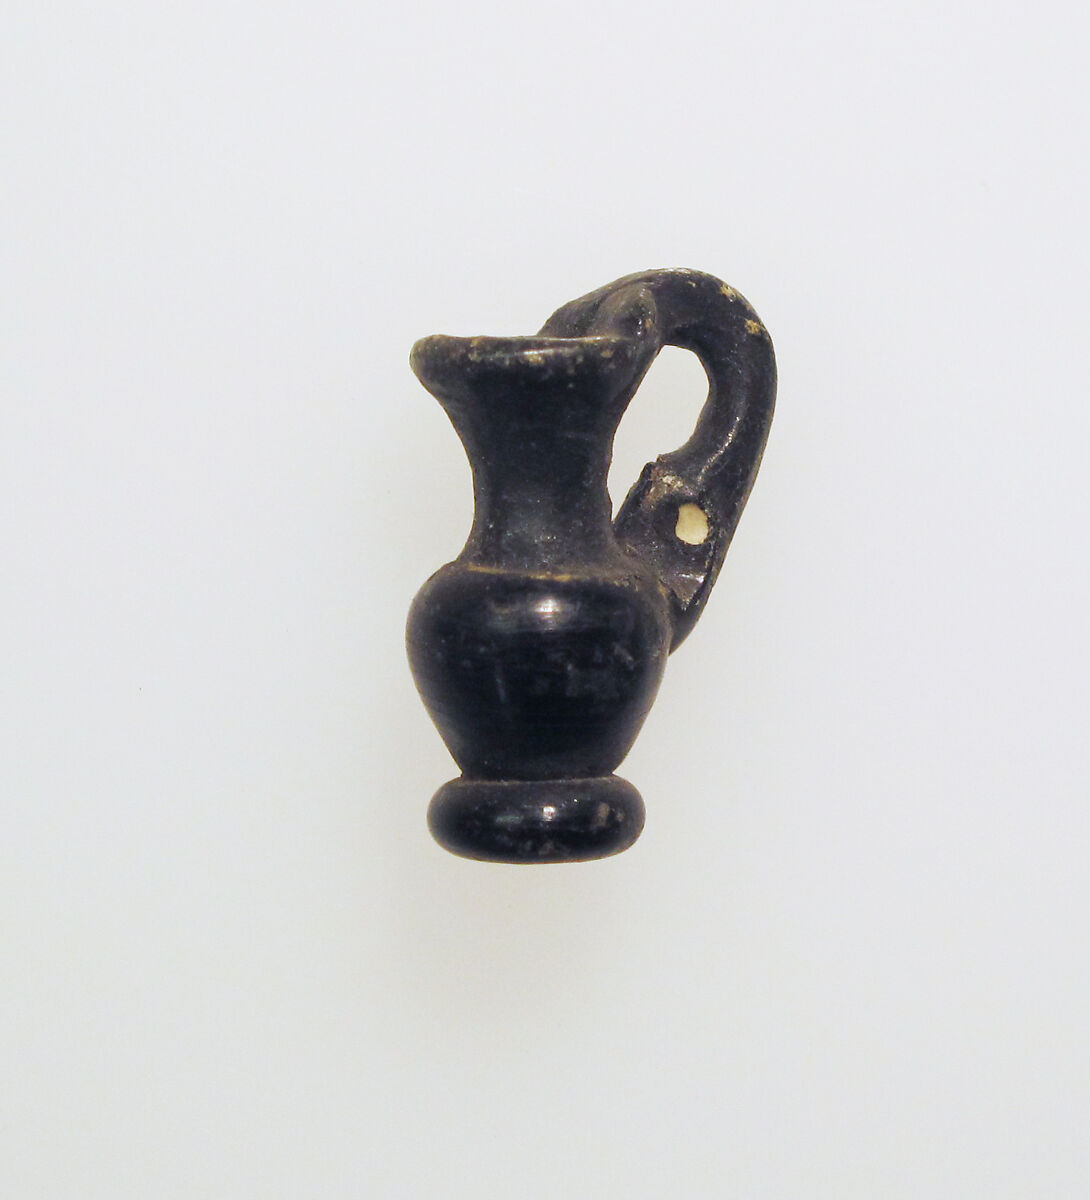 Glass pendant in the form of a jug, Glass, Roman 